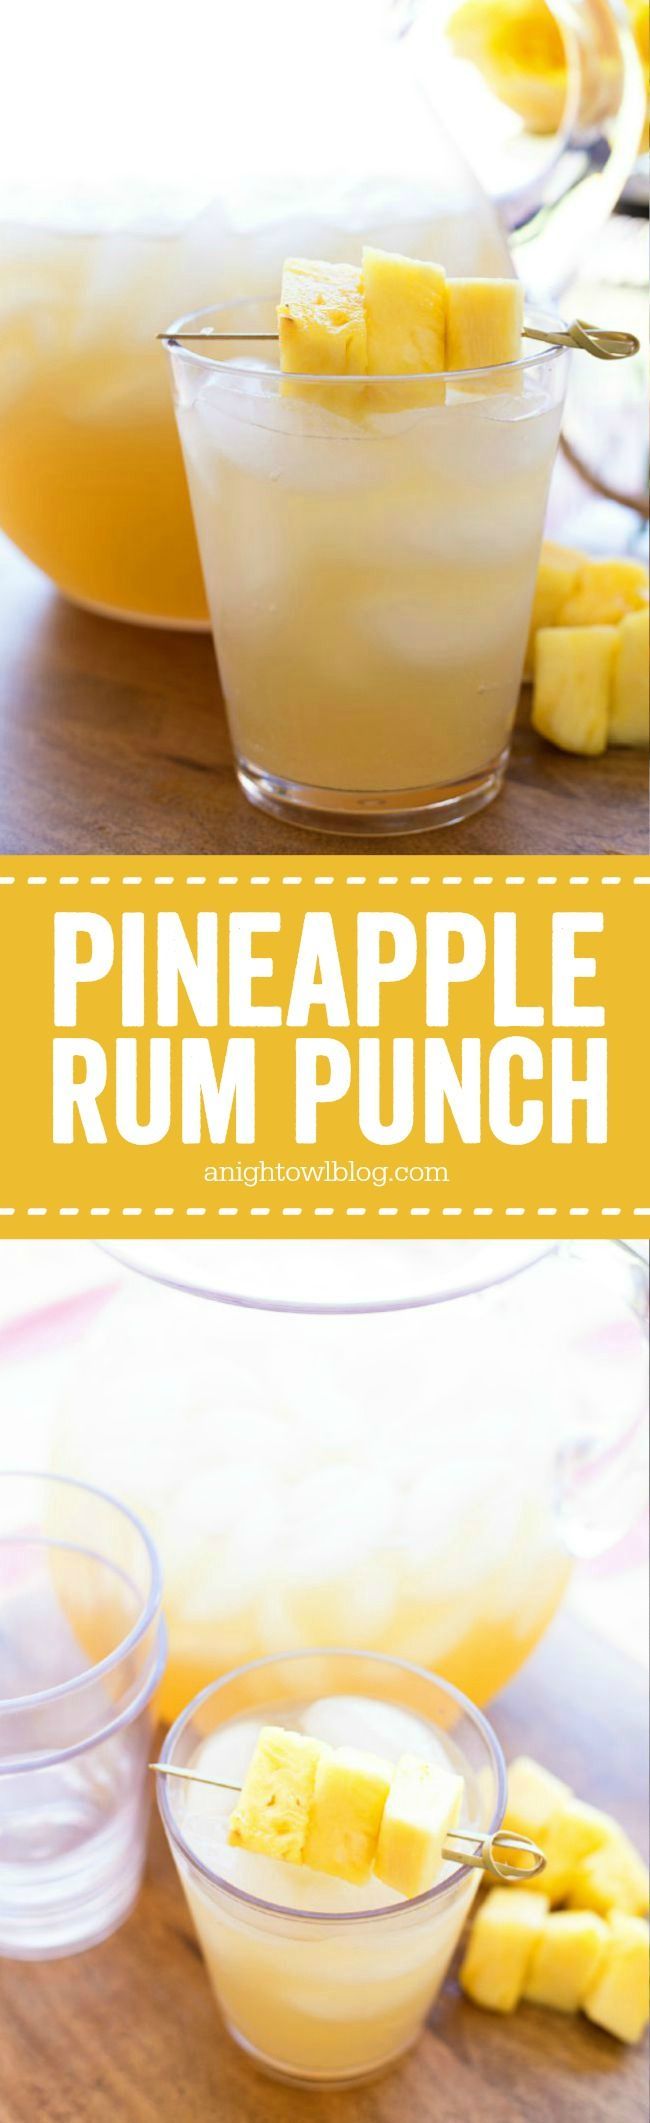 Pineapple Rum Punch – the perfect mix of tropical flavors in one amazing and easy